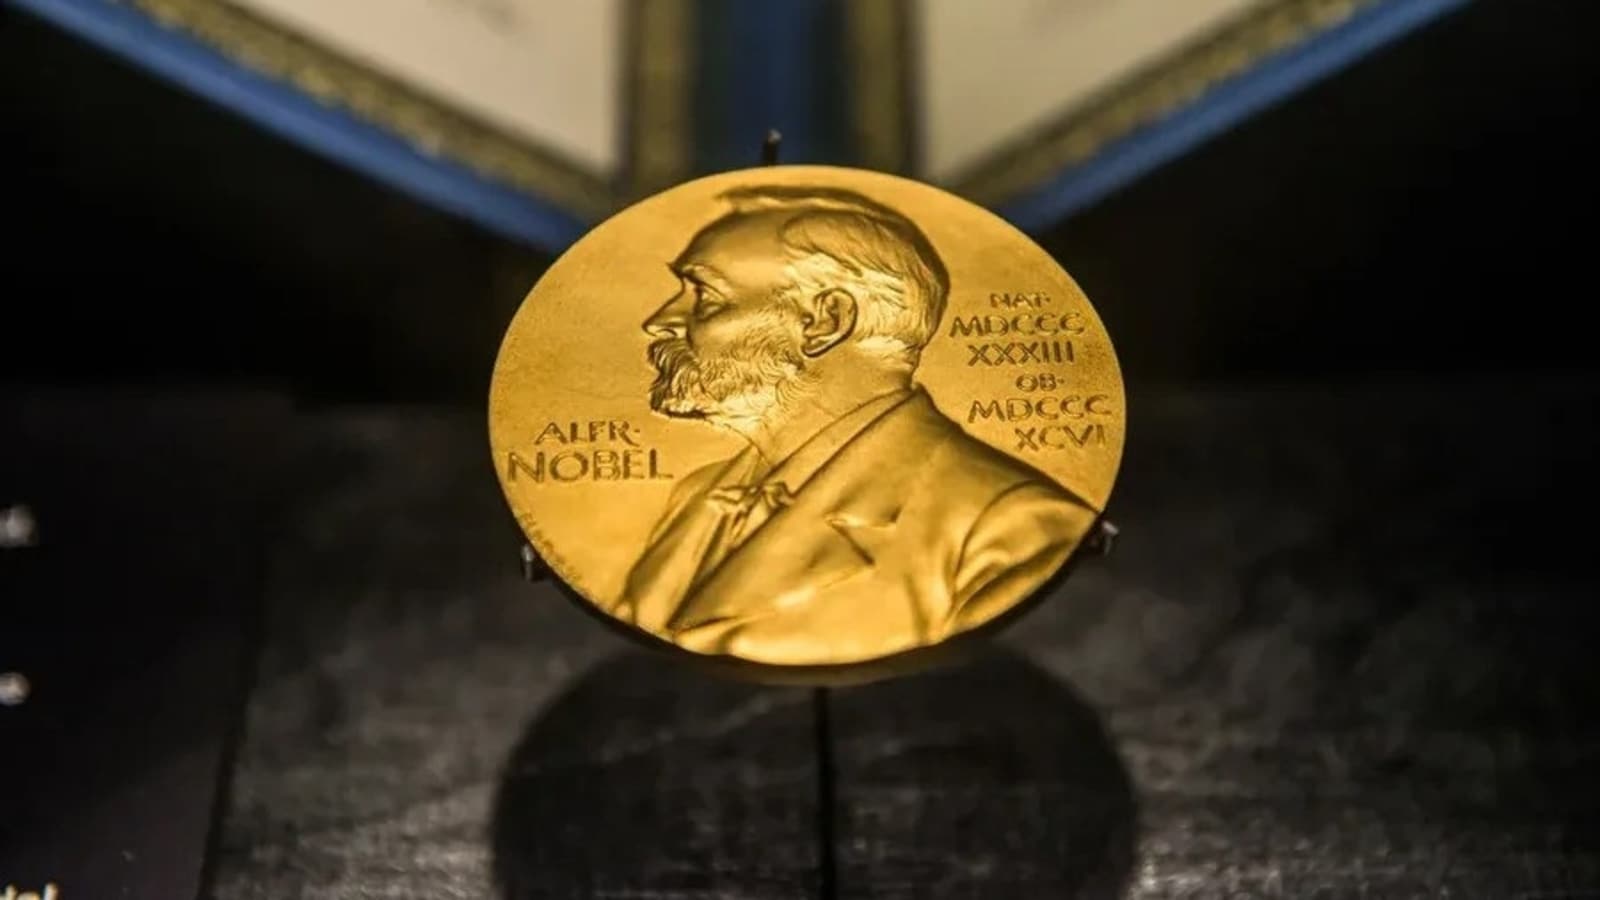 Russia, Iran can't attend Nobel Prize event this year; invitation revoked after flak